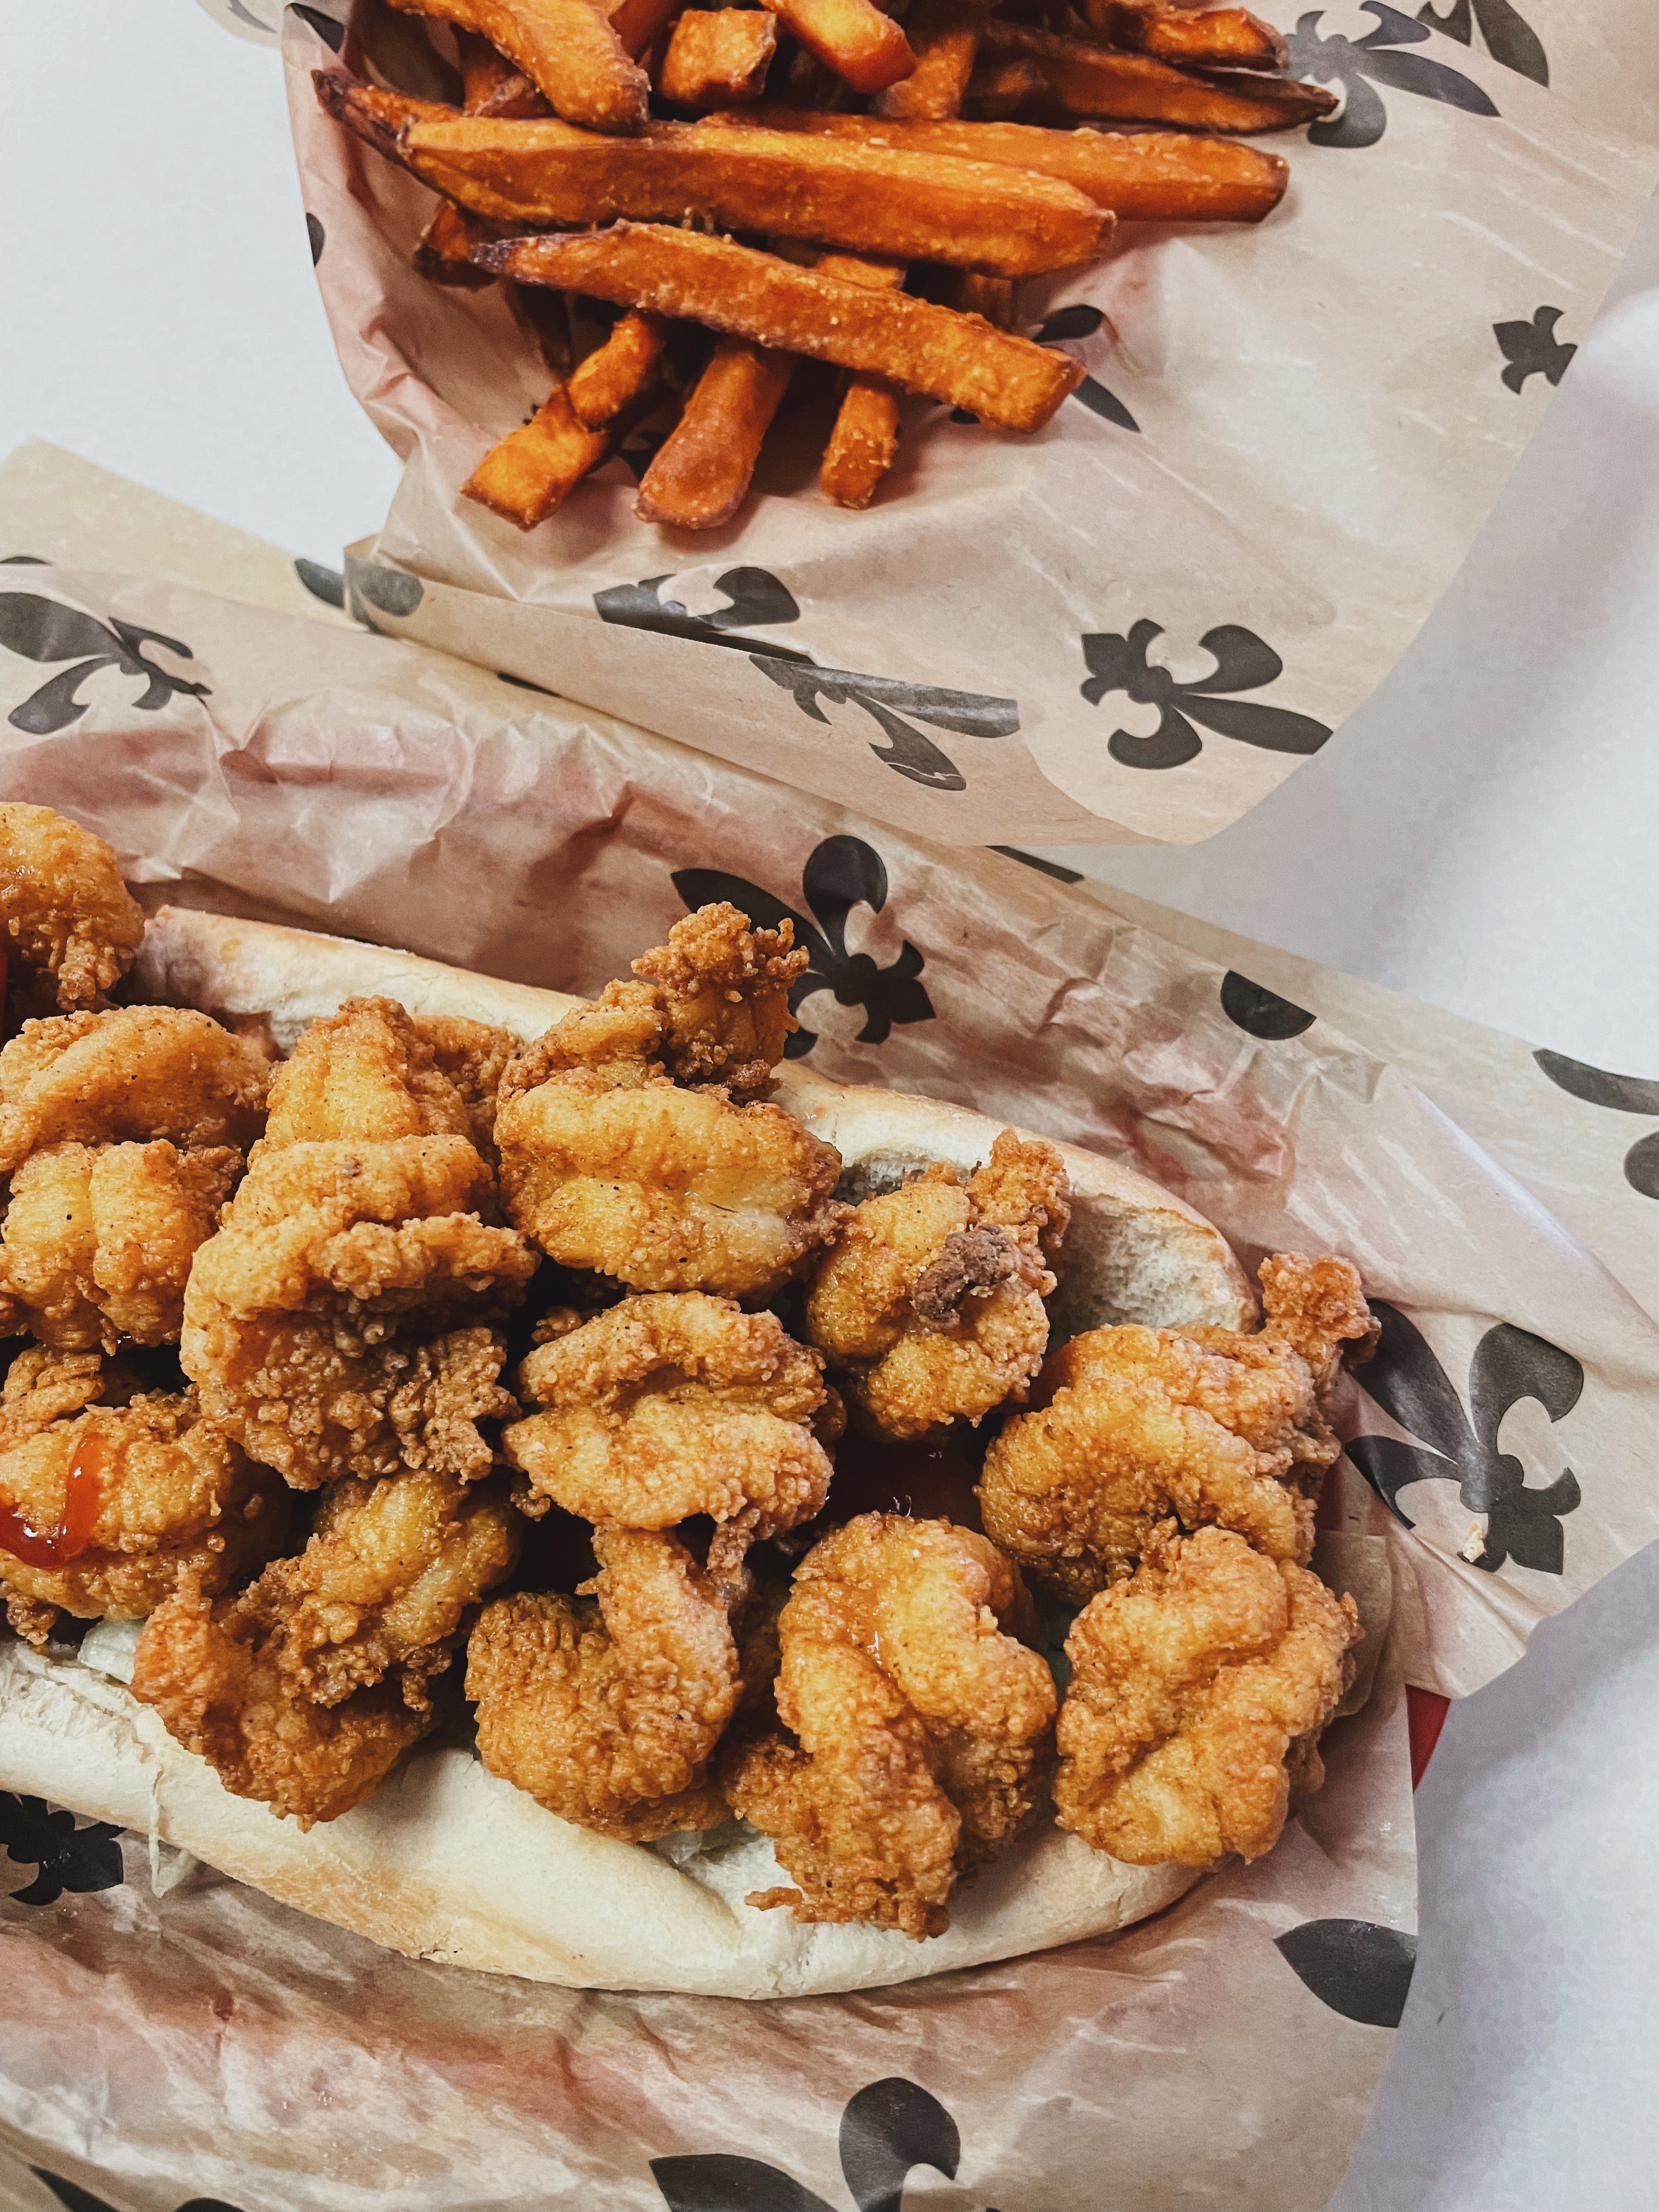 A Shimp Po-Boy And Sweet Potato Fries From Angelle's Old Fashioned Hamburgers